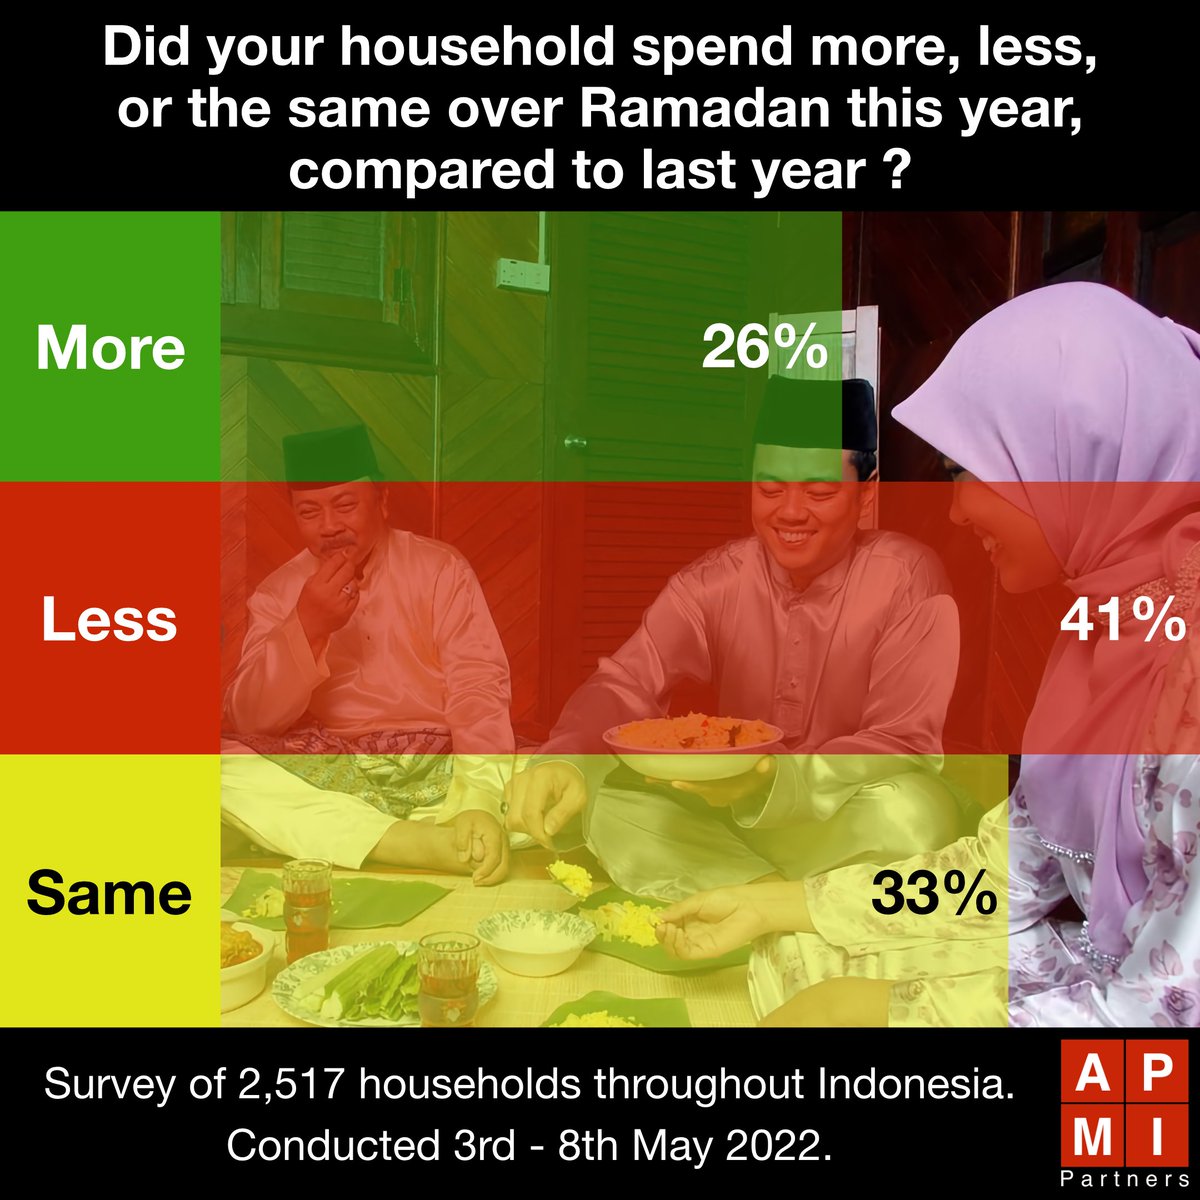 #Indonesia - A survey of households has found that 41% spent less; 33% spent the same & 26% spent more over #Ramadan this year compared to last year, indicating continued low #consumersentiment & concerns with current & future household income | #economicresearch #APMIPartners